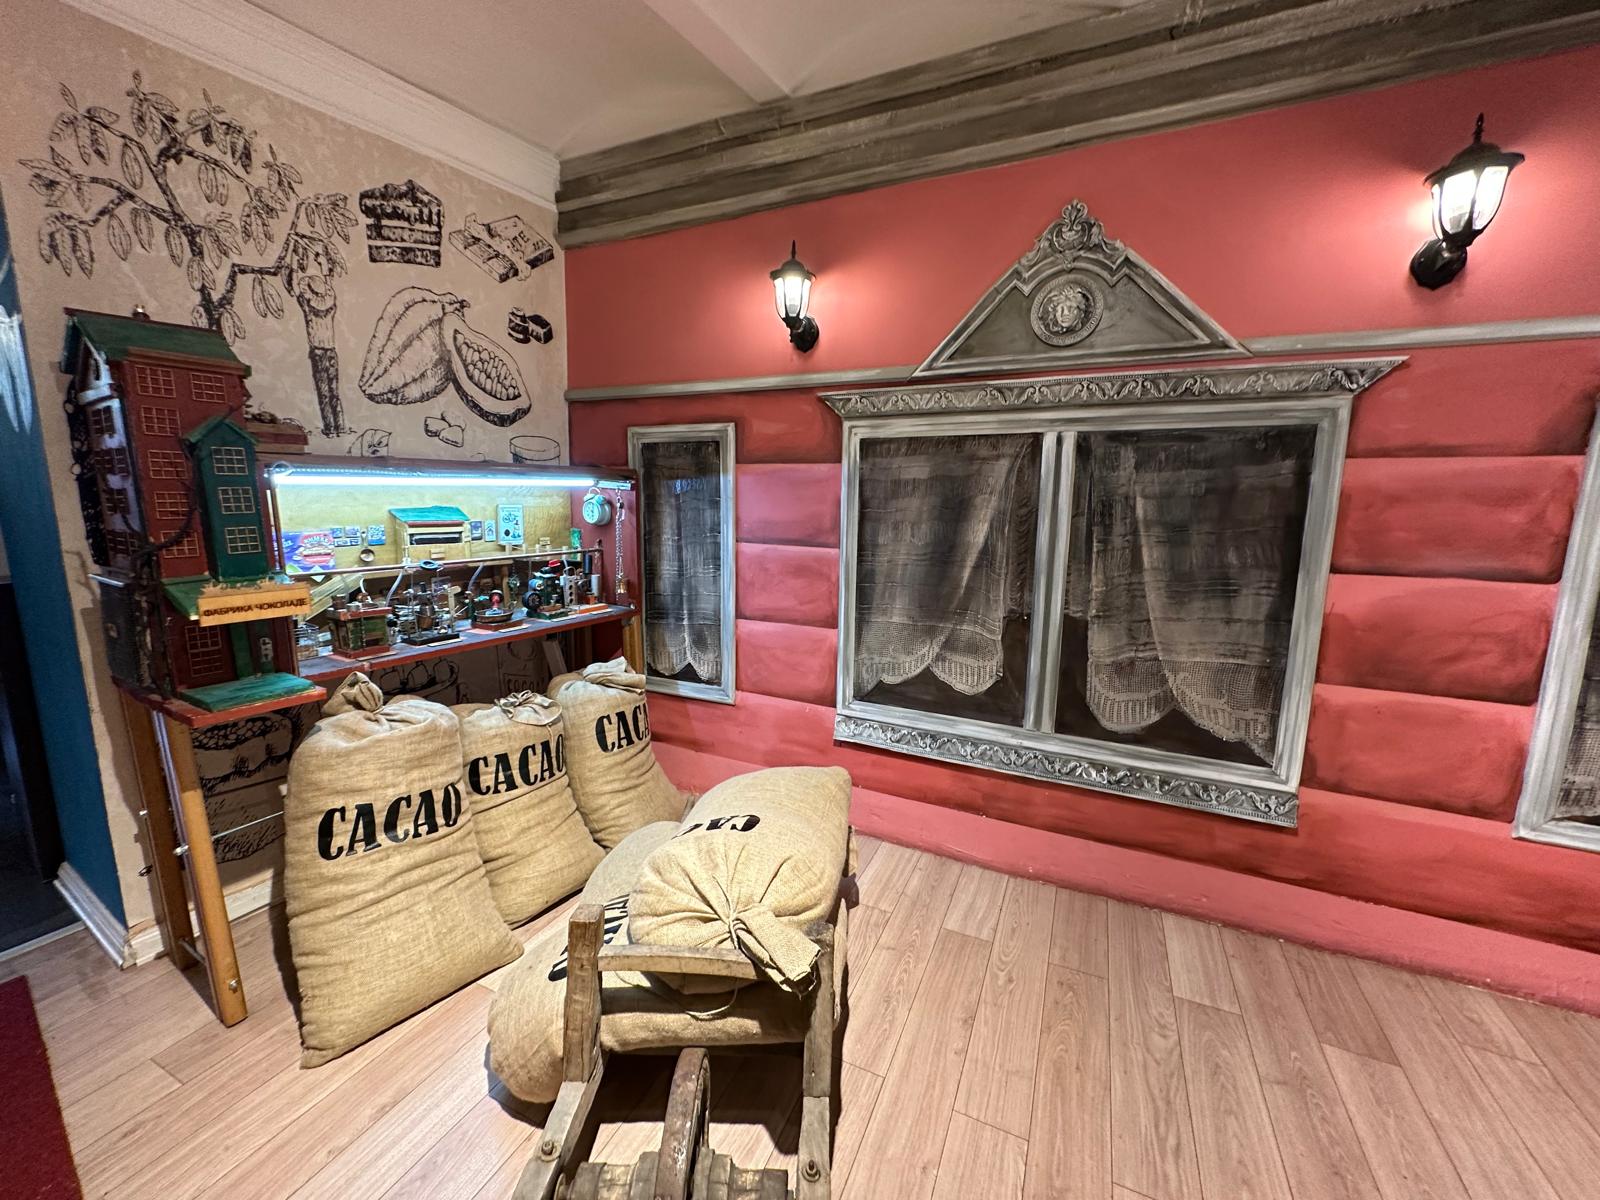 Museum of Chocolate, private collection, photo by Andreas Kuoni